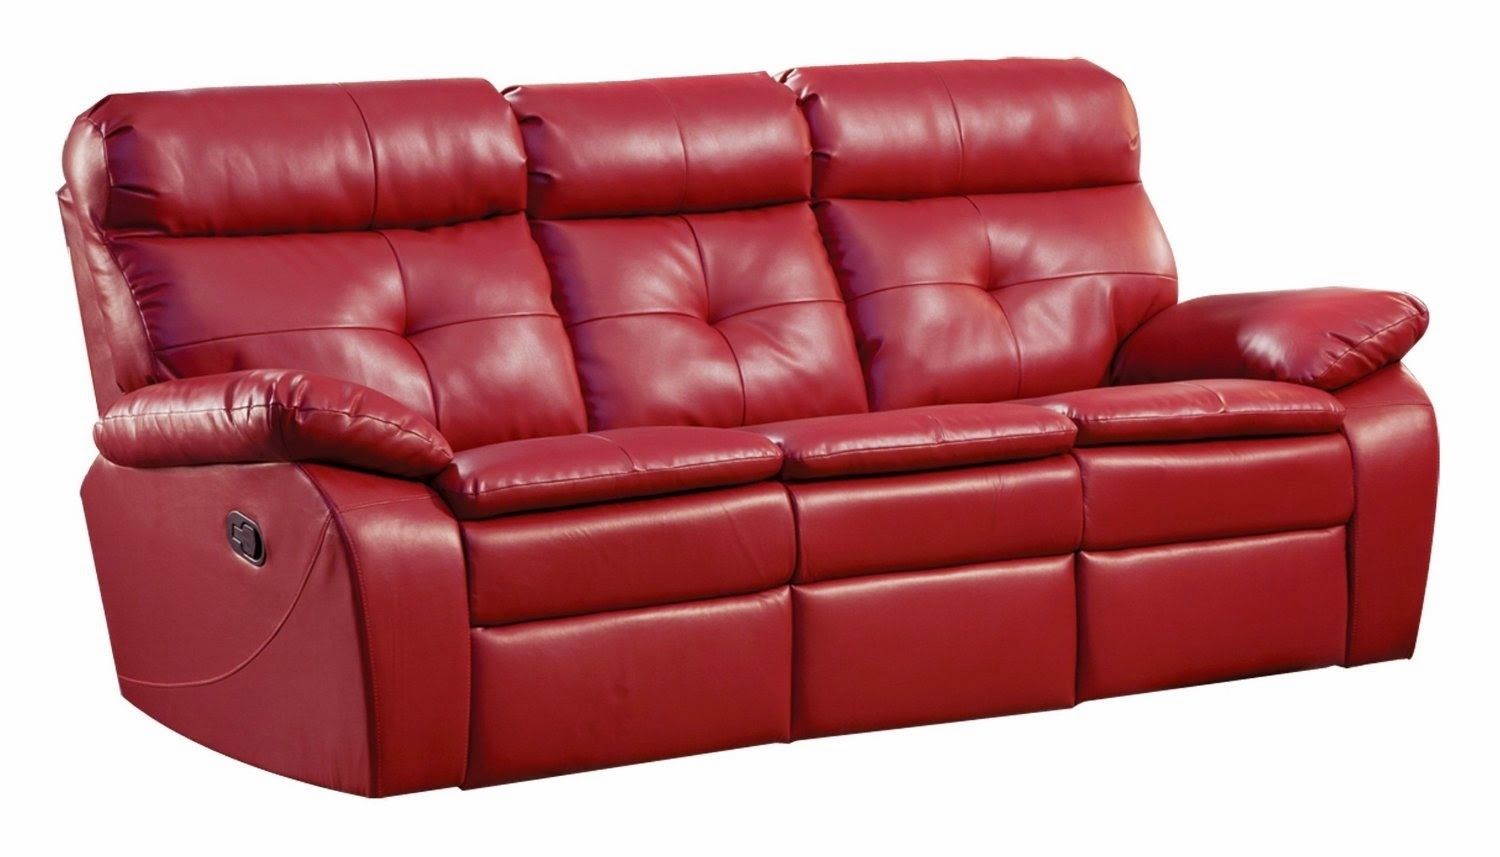 The Best Reclining Sofa Reviews: Red Leather Reclining Sofa And Loveseat Pertaining To Red Leather Reclining Sofas And Loveseats (Photo 8 of 15)